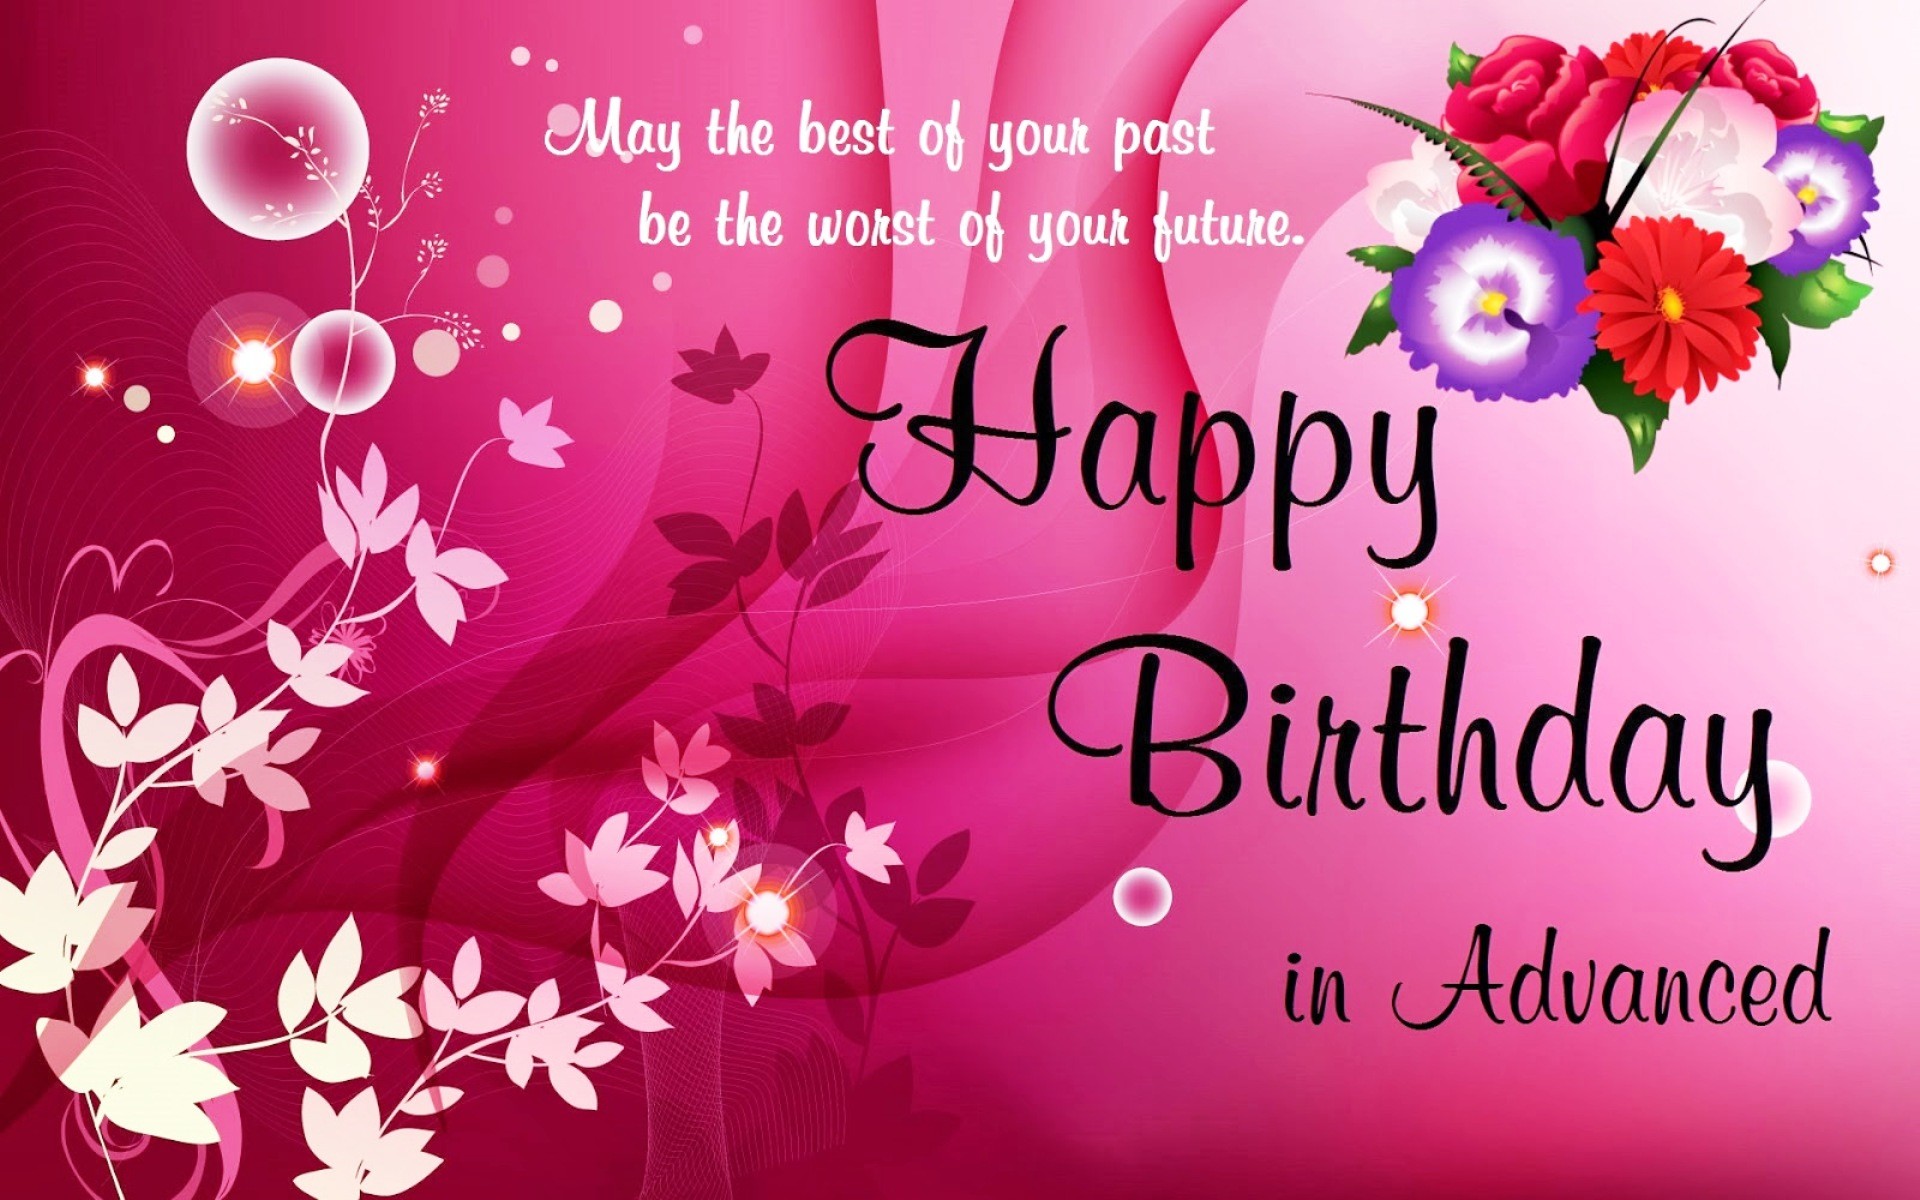 1920x1200 Happy Birthday Wallpapers With Name Wallpaper 1920Ã1280 Happy Birthday Pic  Wallpapers (66 Wallpapers